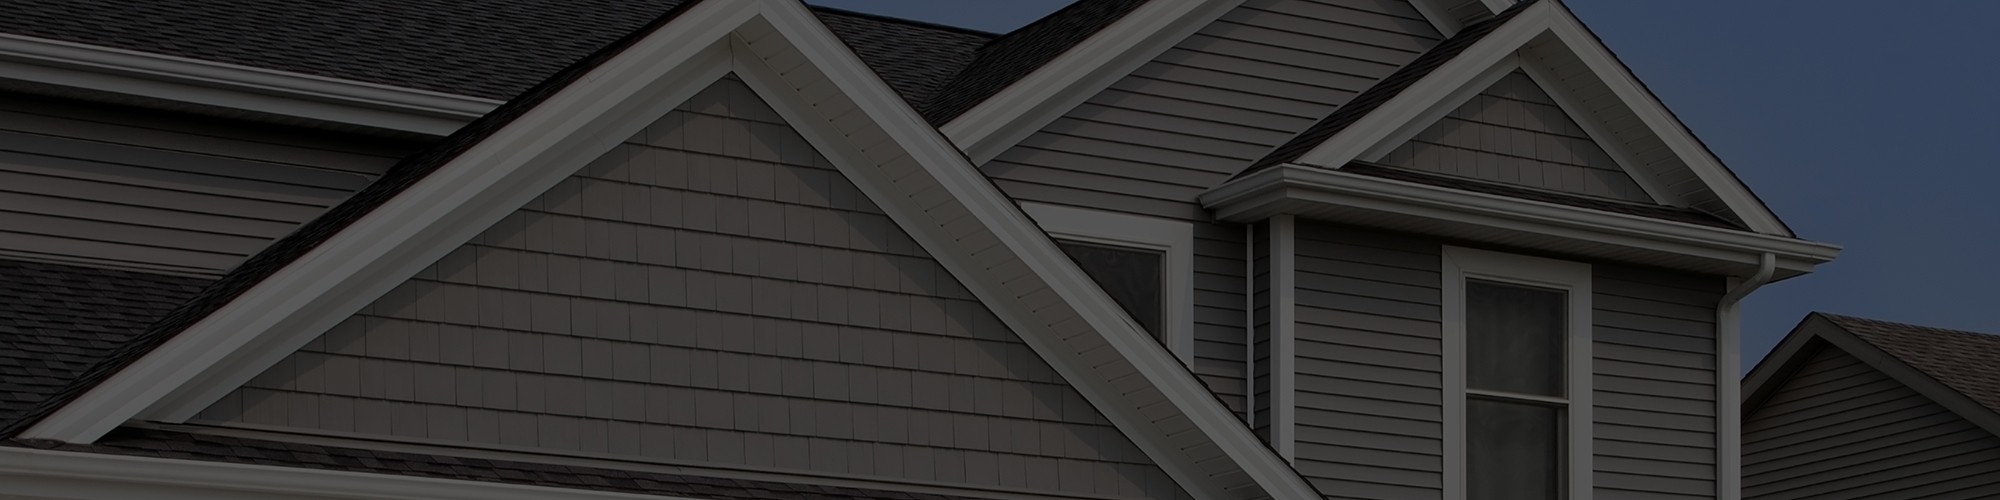 New vinyl siding in Michigan for less than $5,000